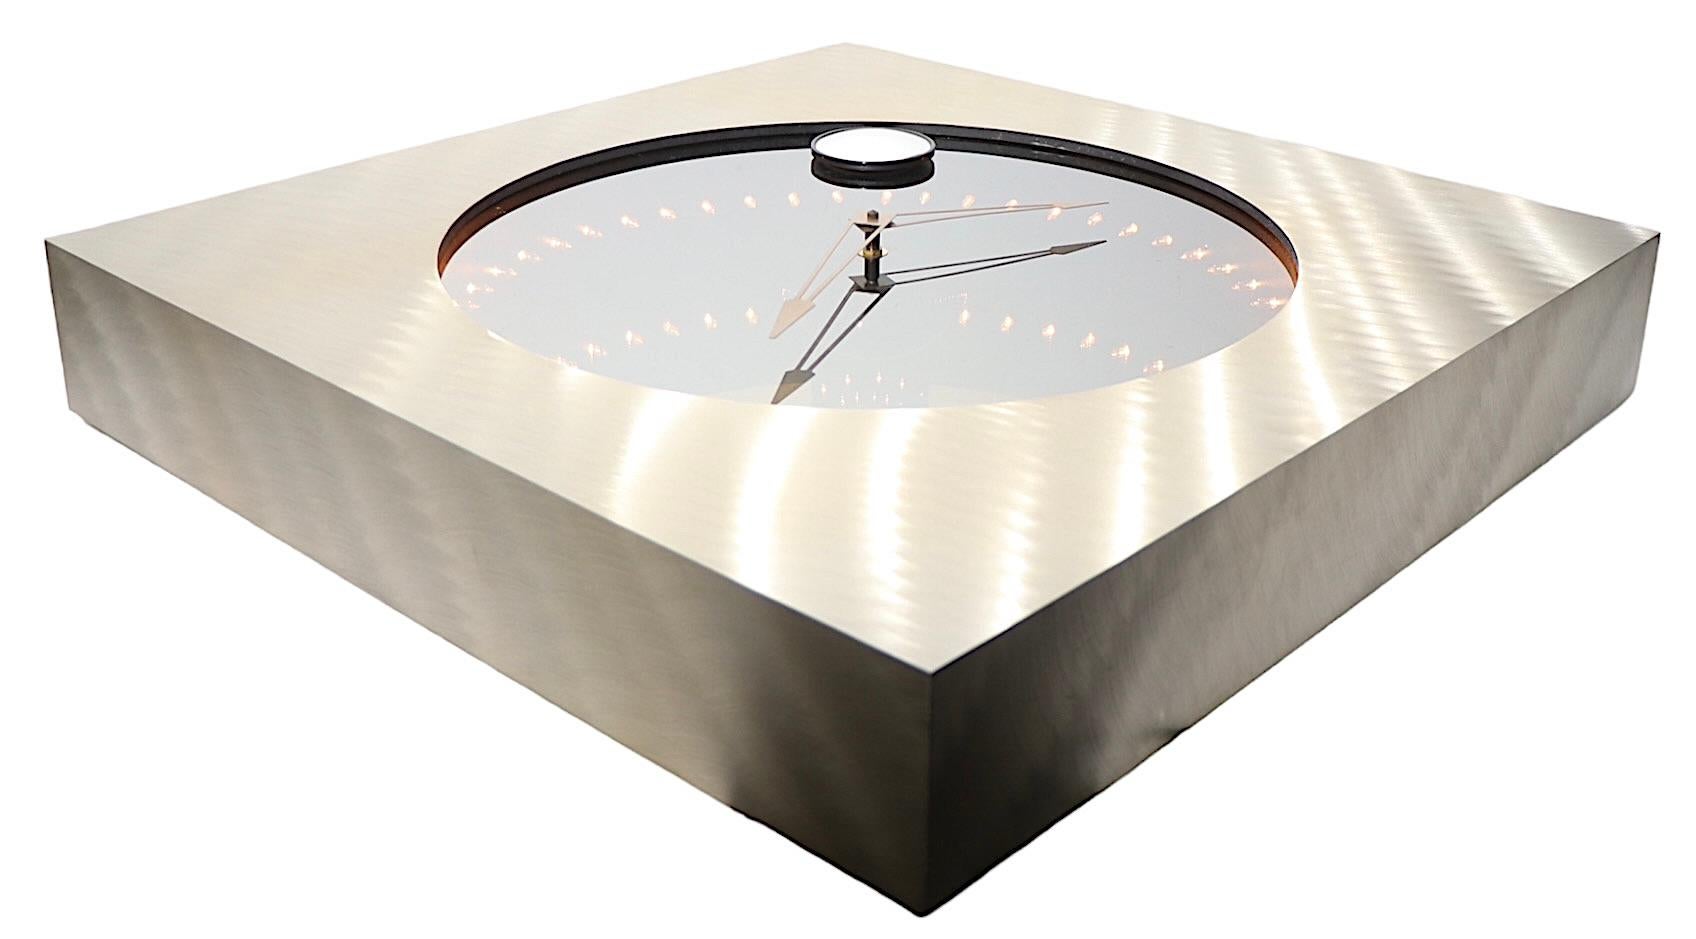 Chic, glam post modern infinity clock, mirror. The clock is surrounded by what appear to be receding points of light, hence the name Infinity Clock. The frame is constructed of brushed aluminum, with a dramatic circular glass face with the clock